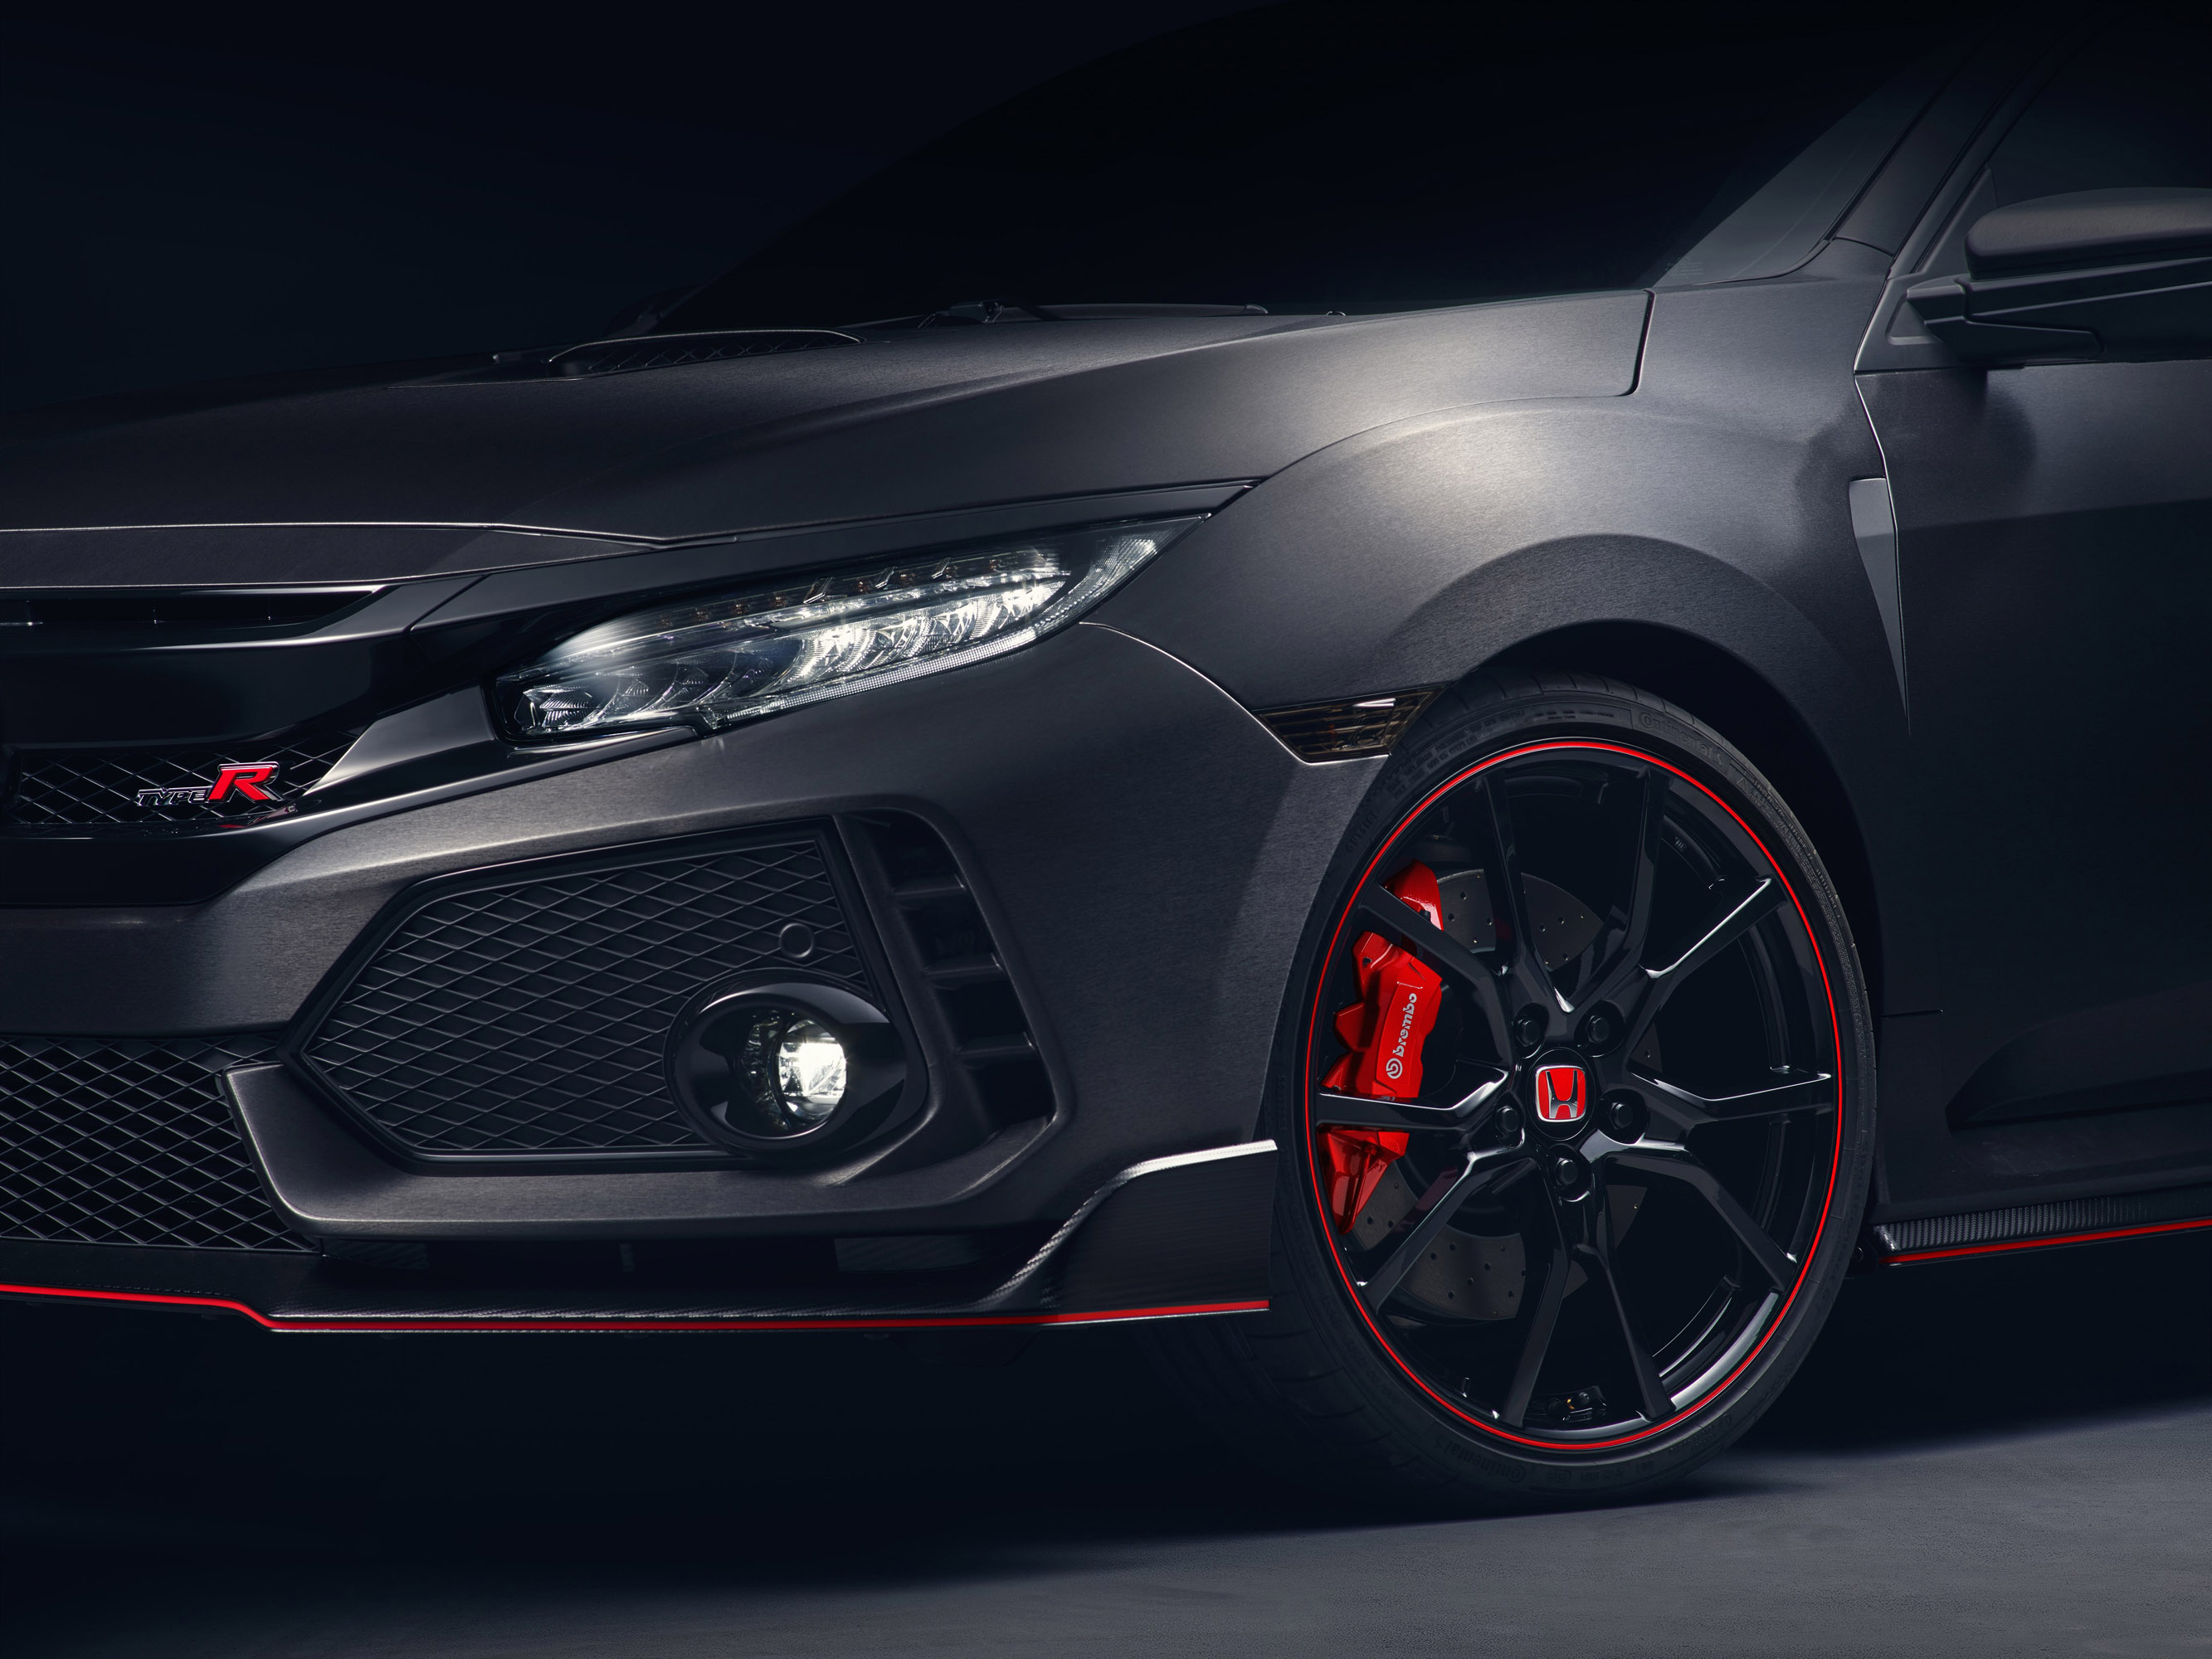 Honda Civic Type R HD Picture Of